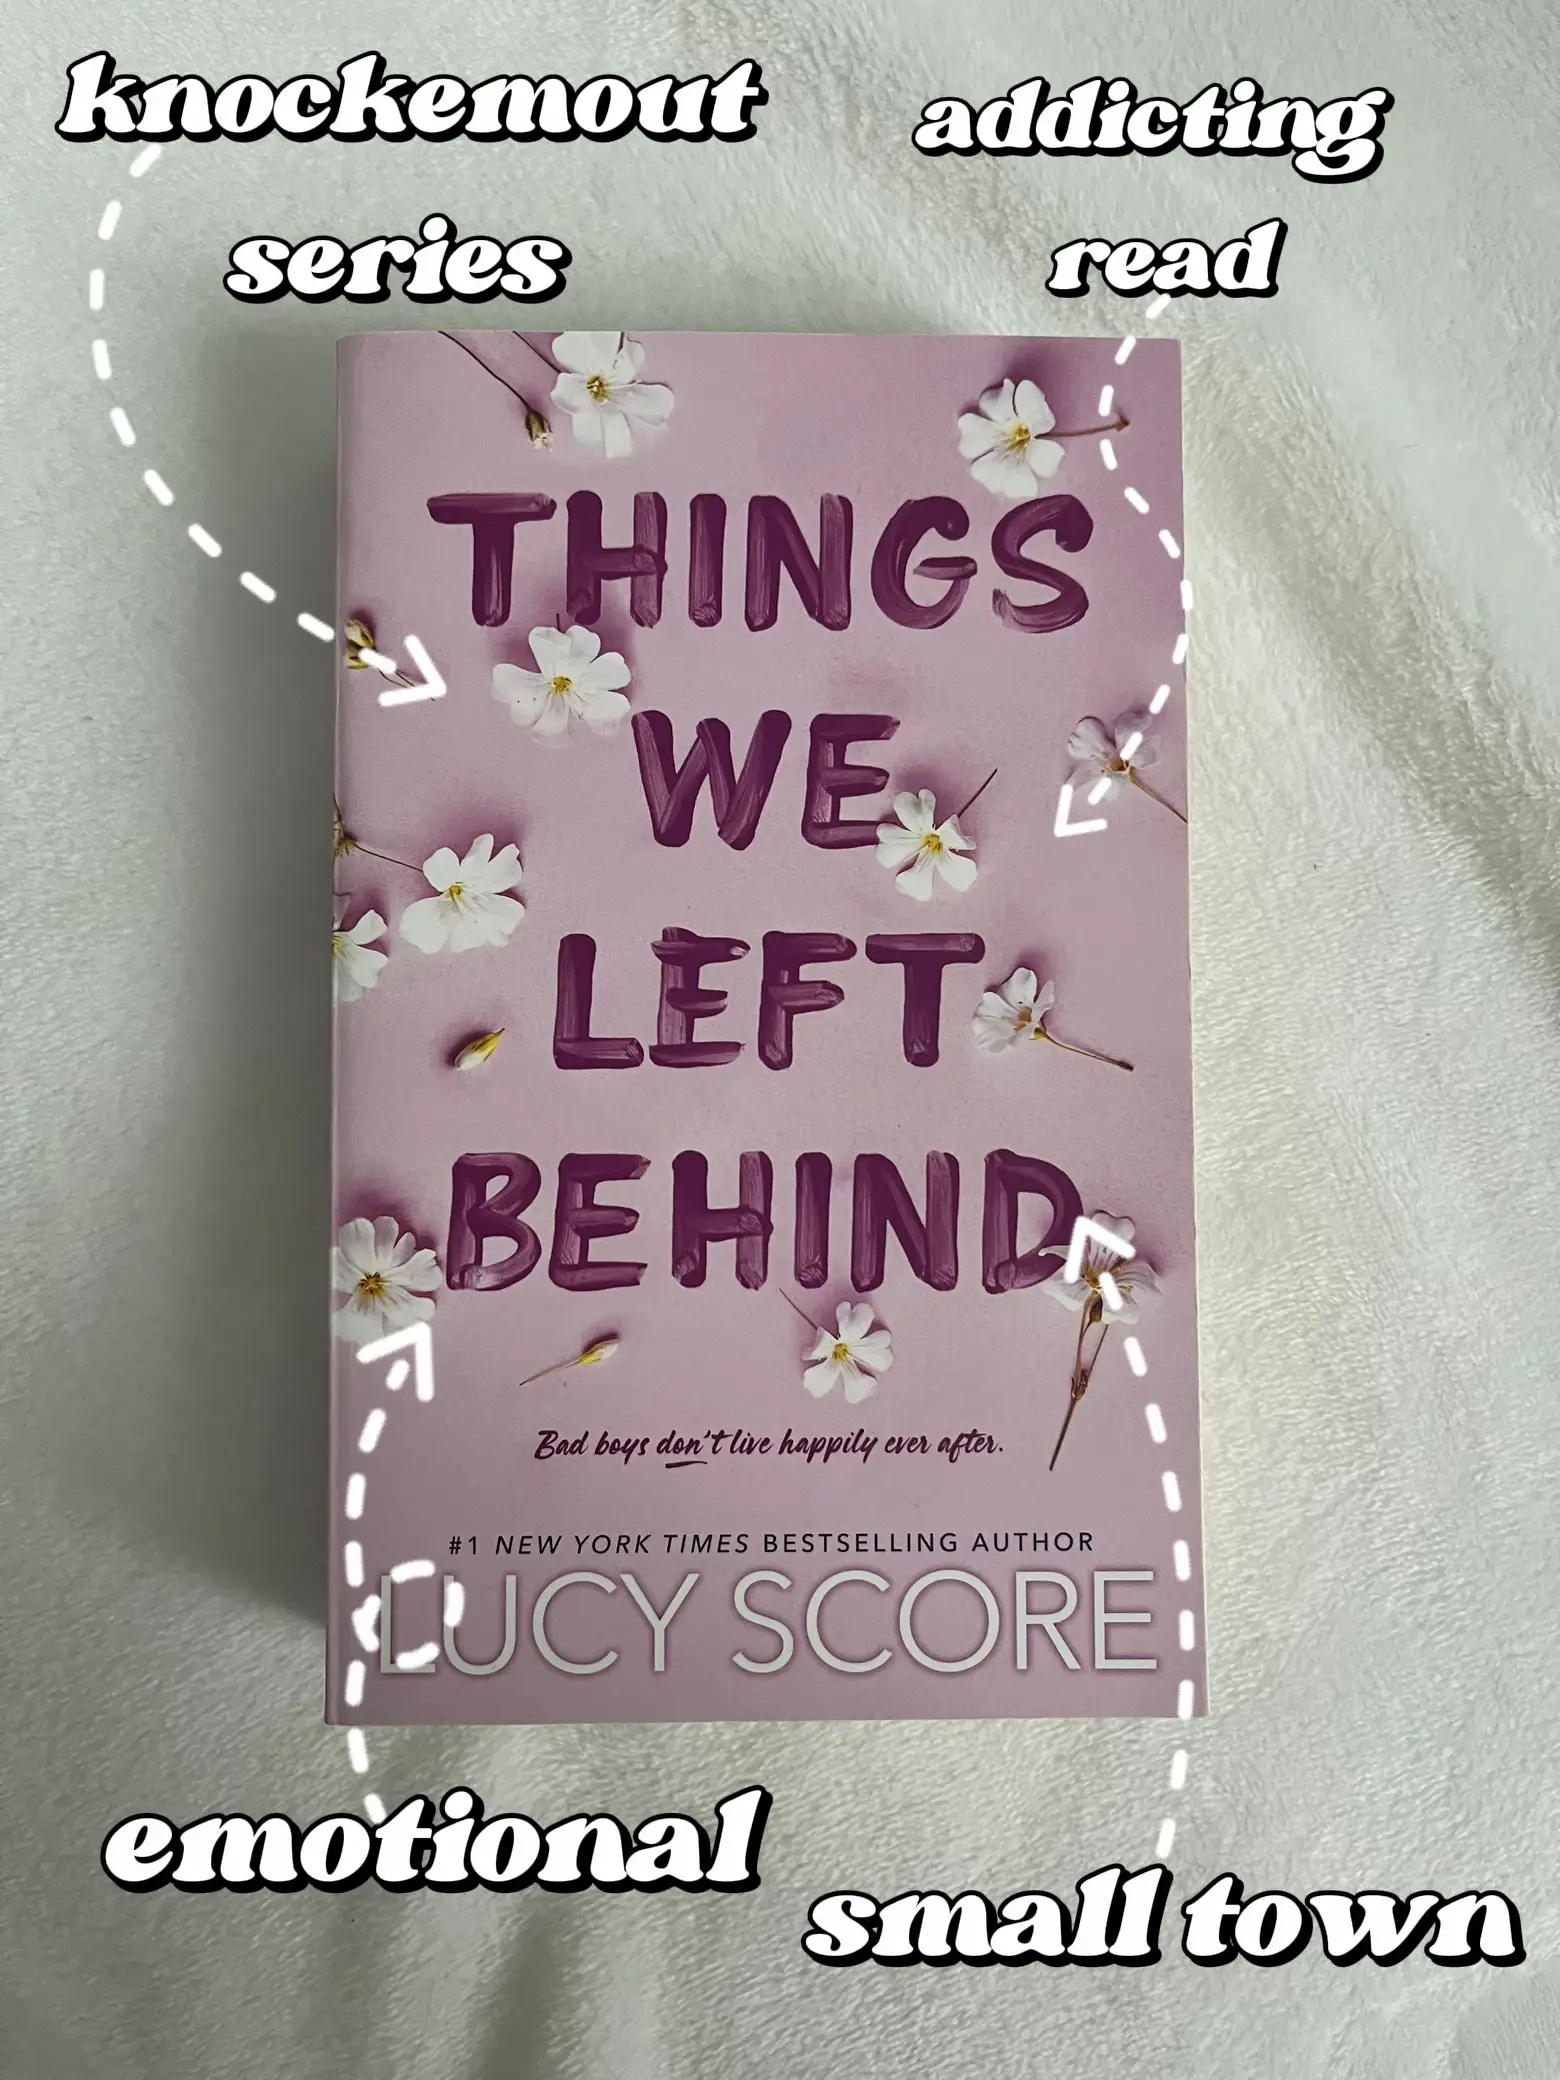 Things We Left Behind - Knockemout #3 by Lucy Score